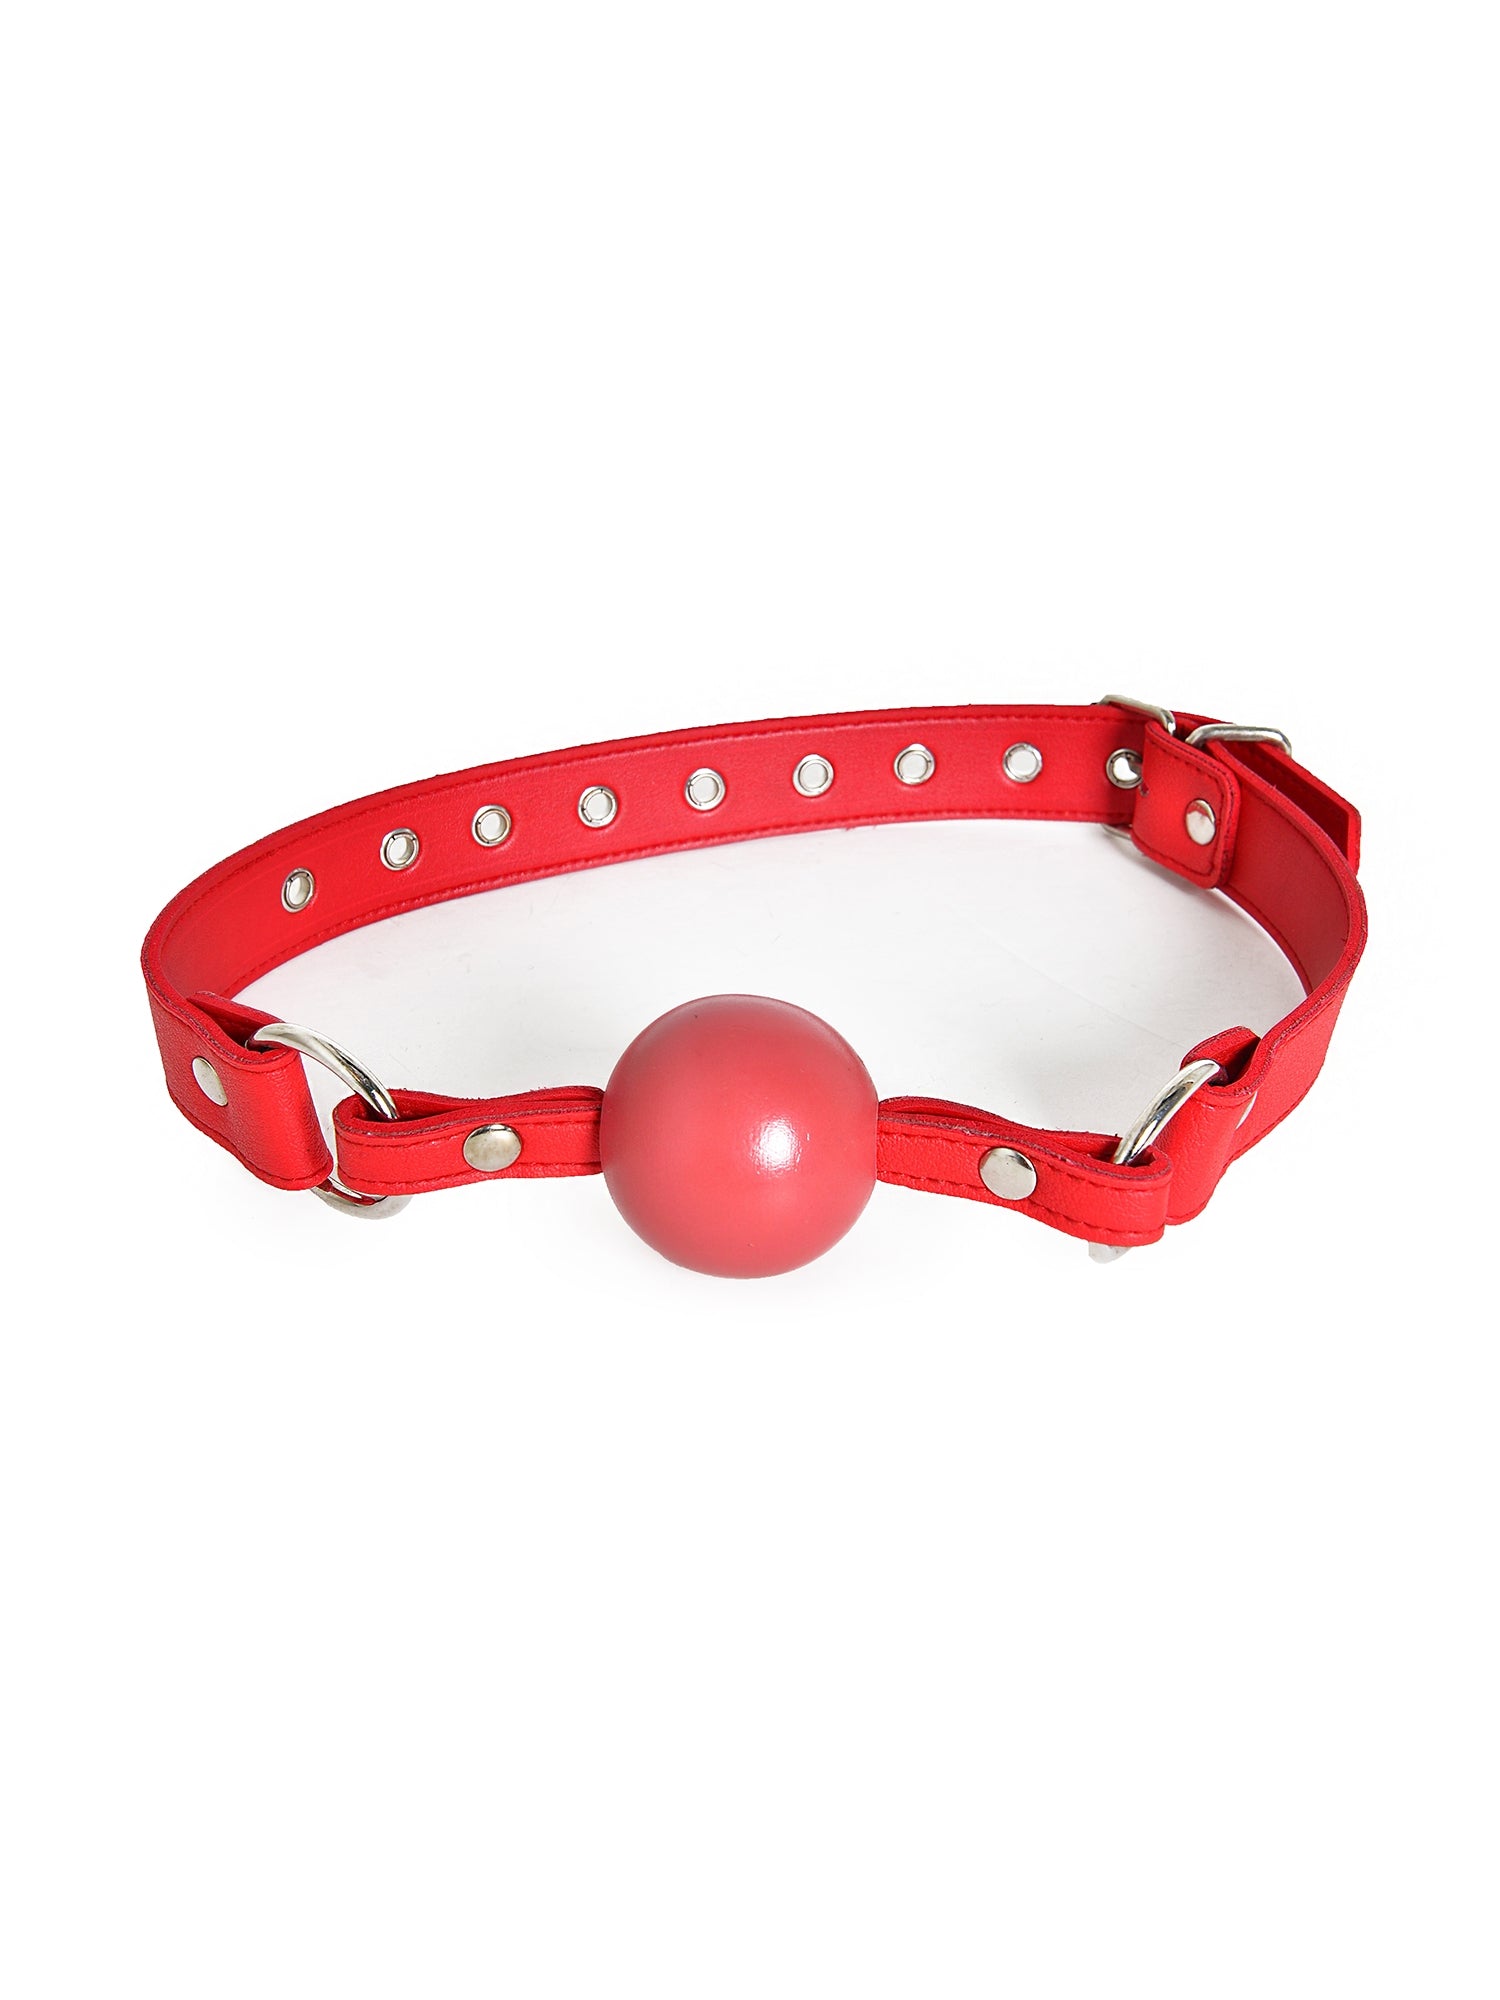 Faux Leather Red Ball Gag Bondage Gags From Honour Skin Two Uk 8993